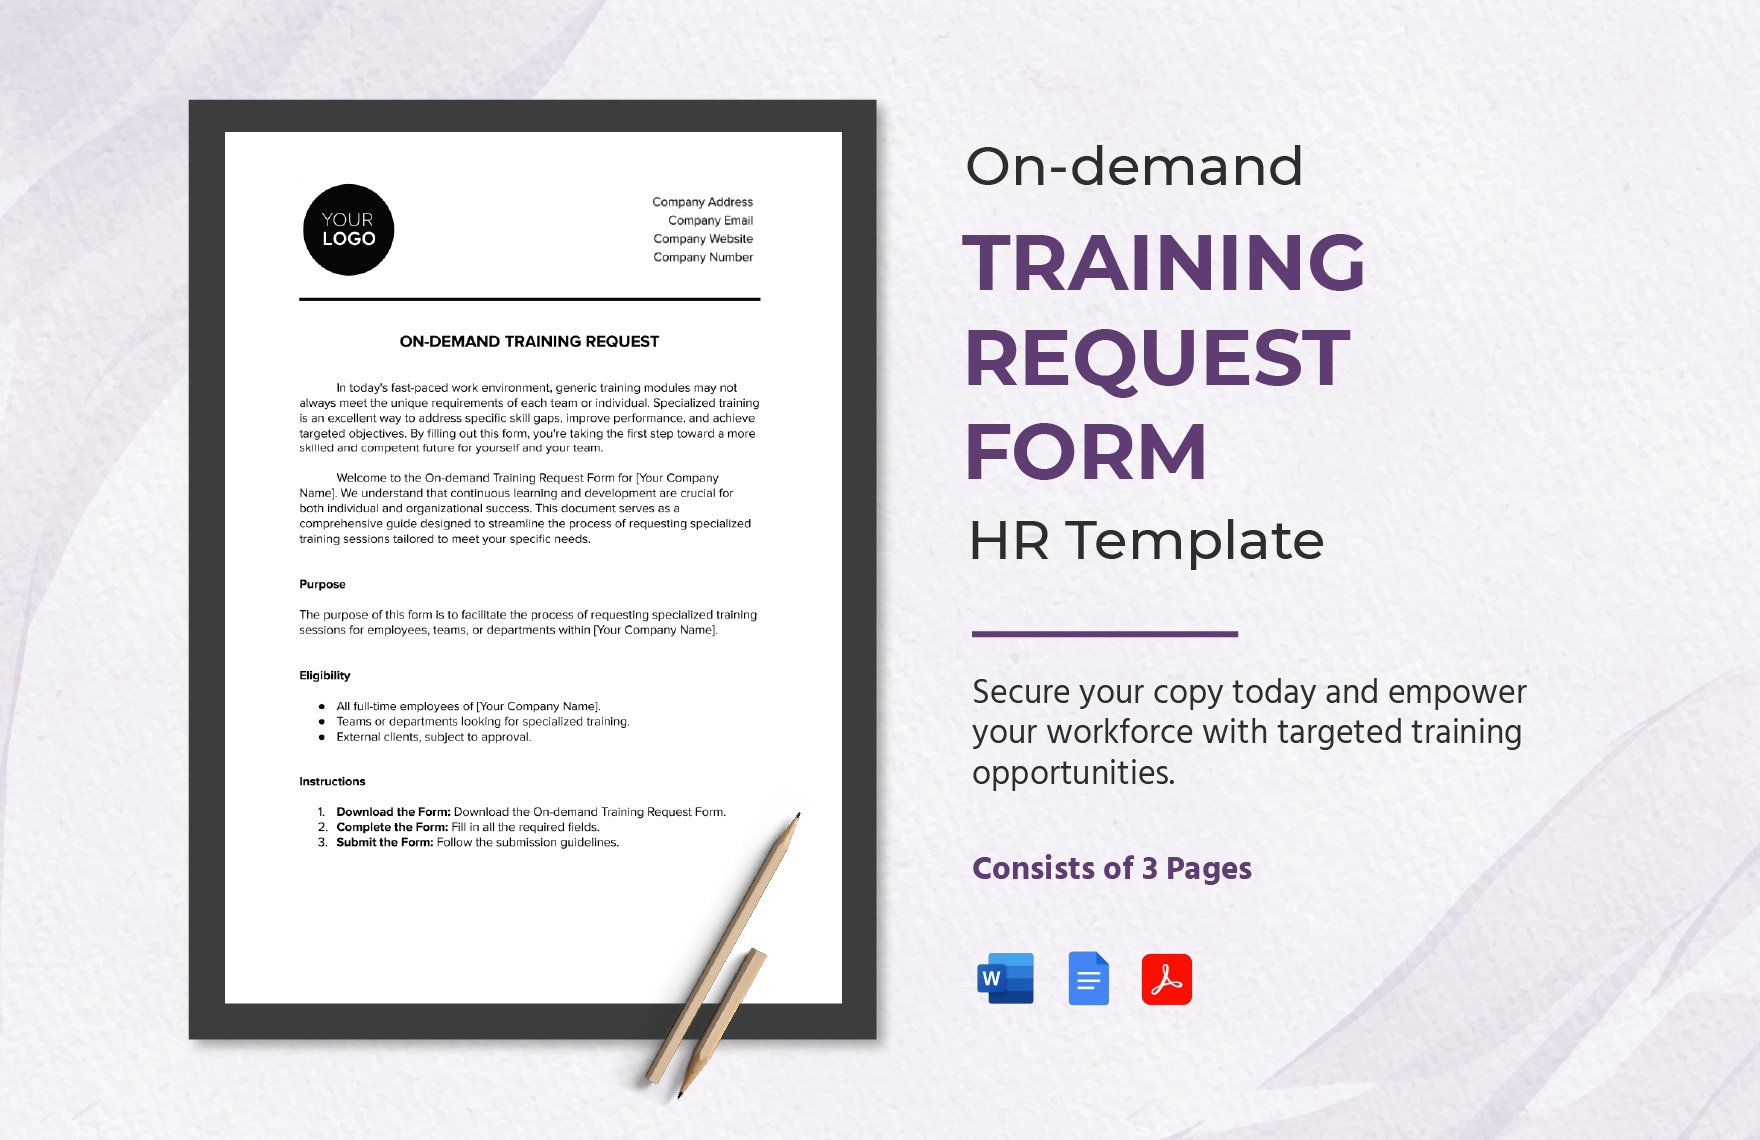 On-demand Training Request Form HR Template in Word, Google Docs, PDF